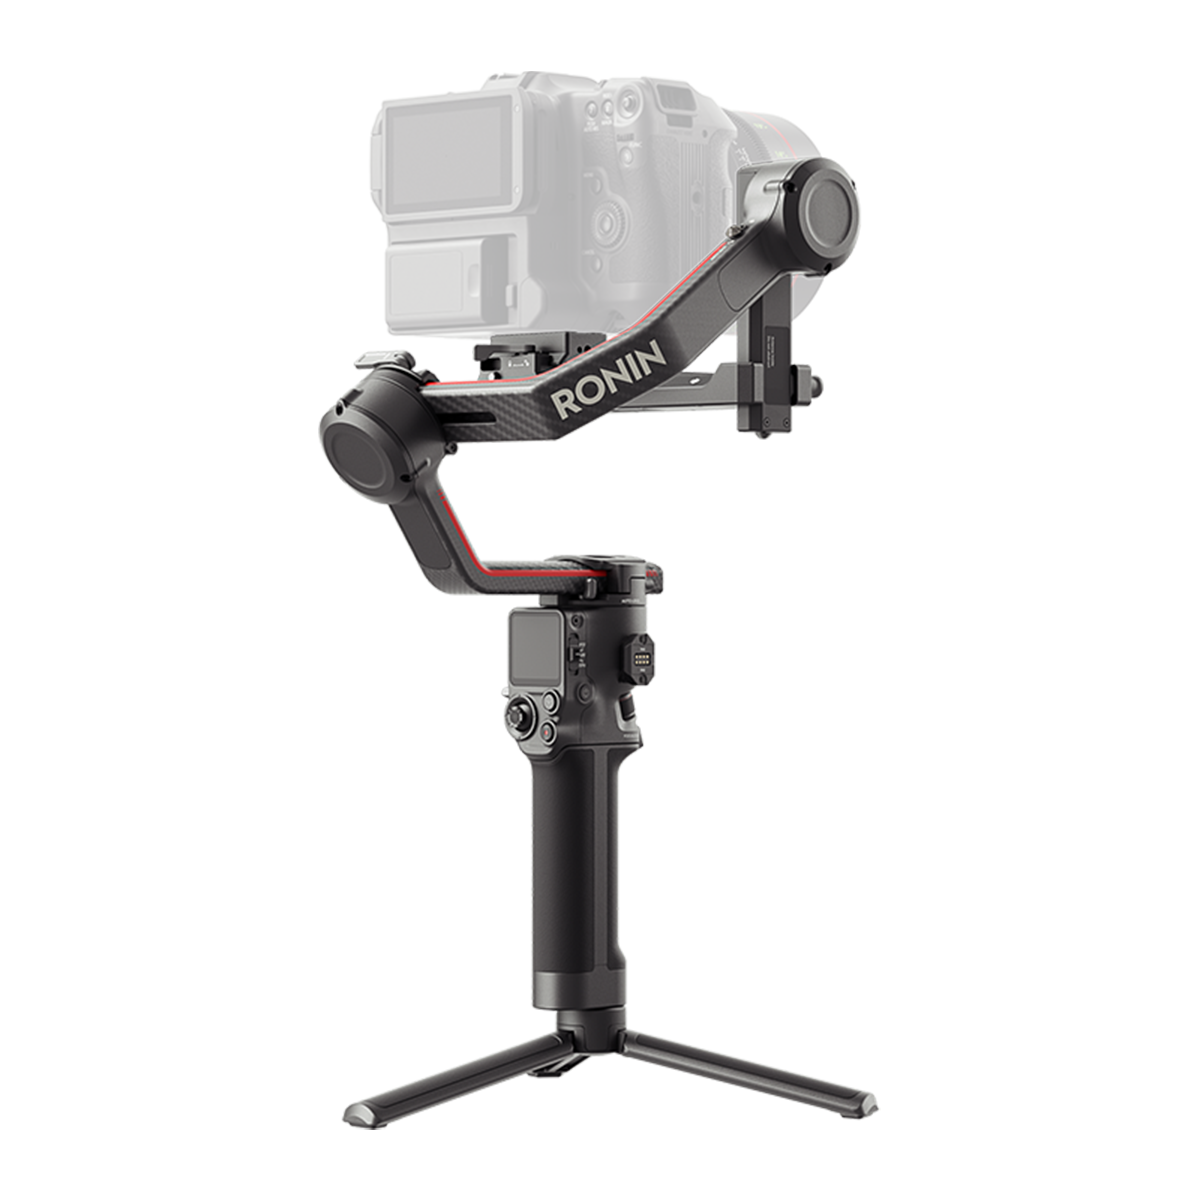 DJI RS 3 Pro Gimbal Stabilizer for DSLR and Cinema Cameras 10lbs Payload